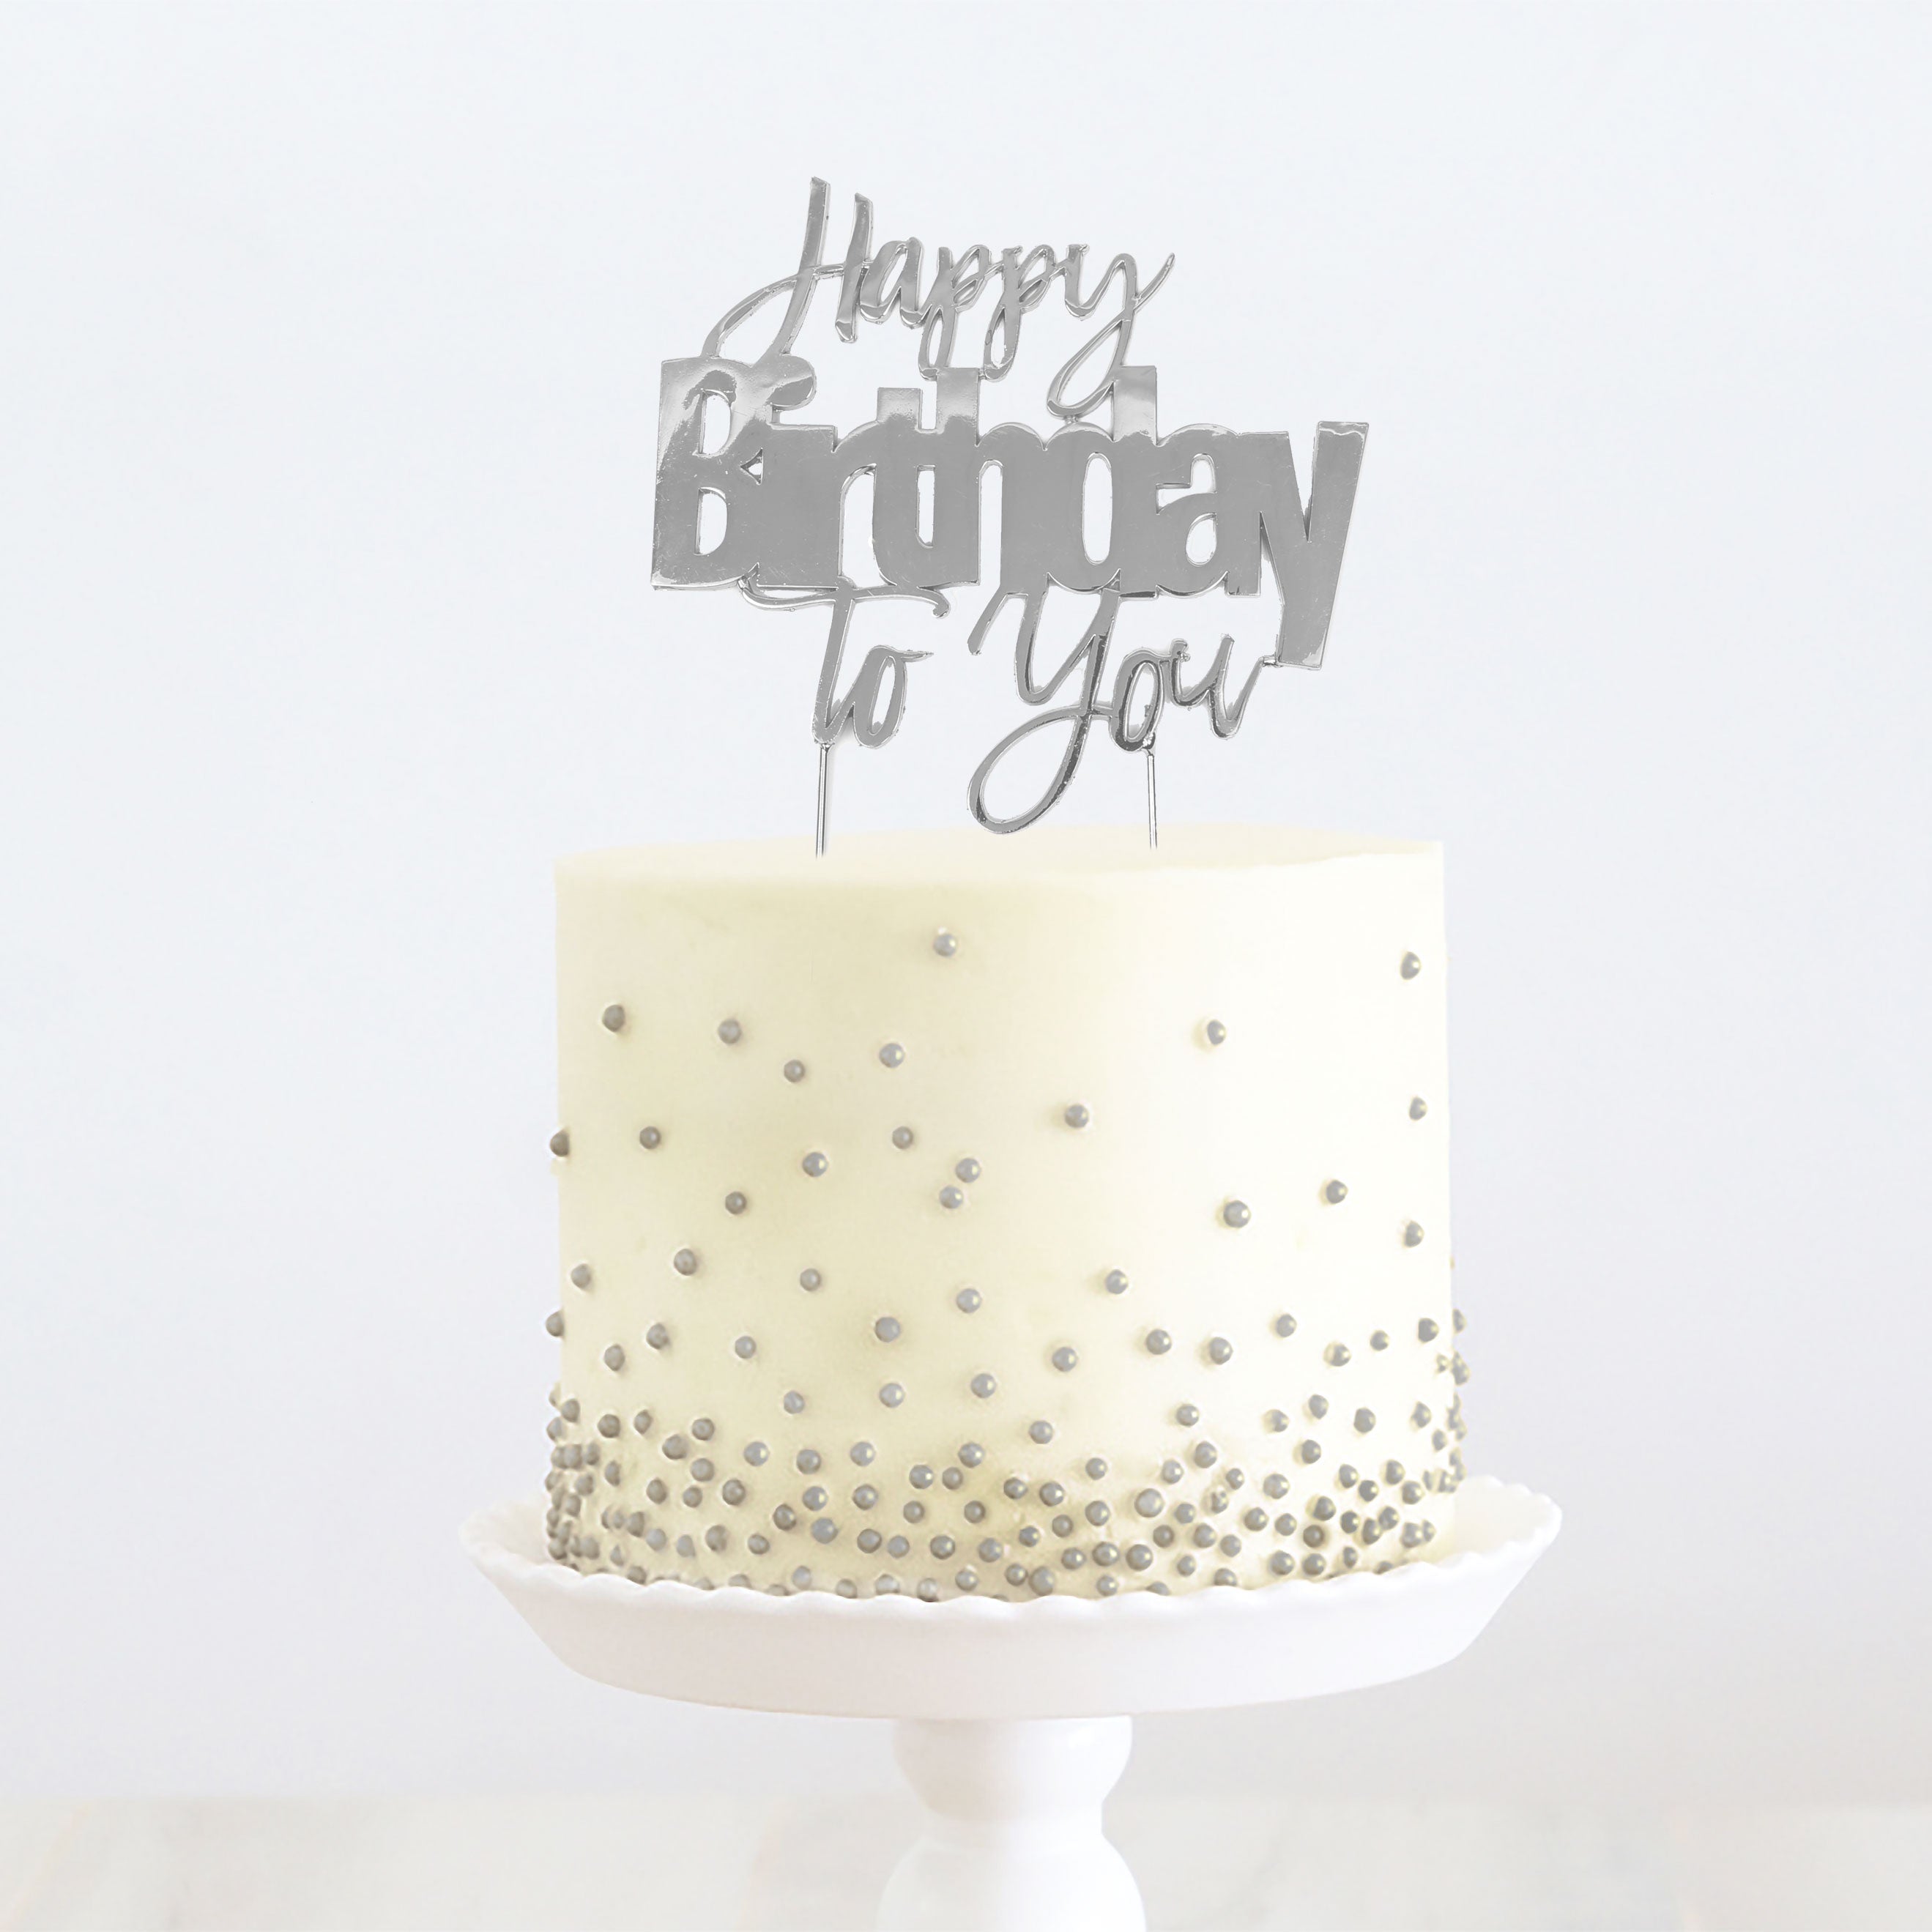 Happy Birthday to You Cake Topper - Silver Plated